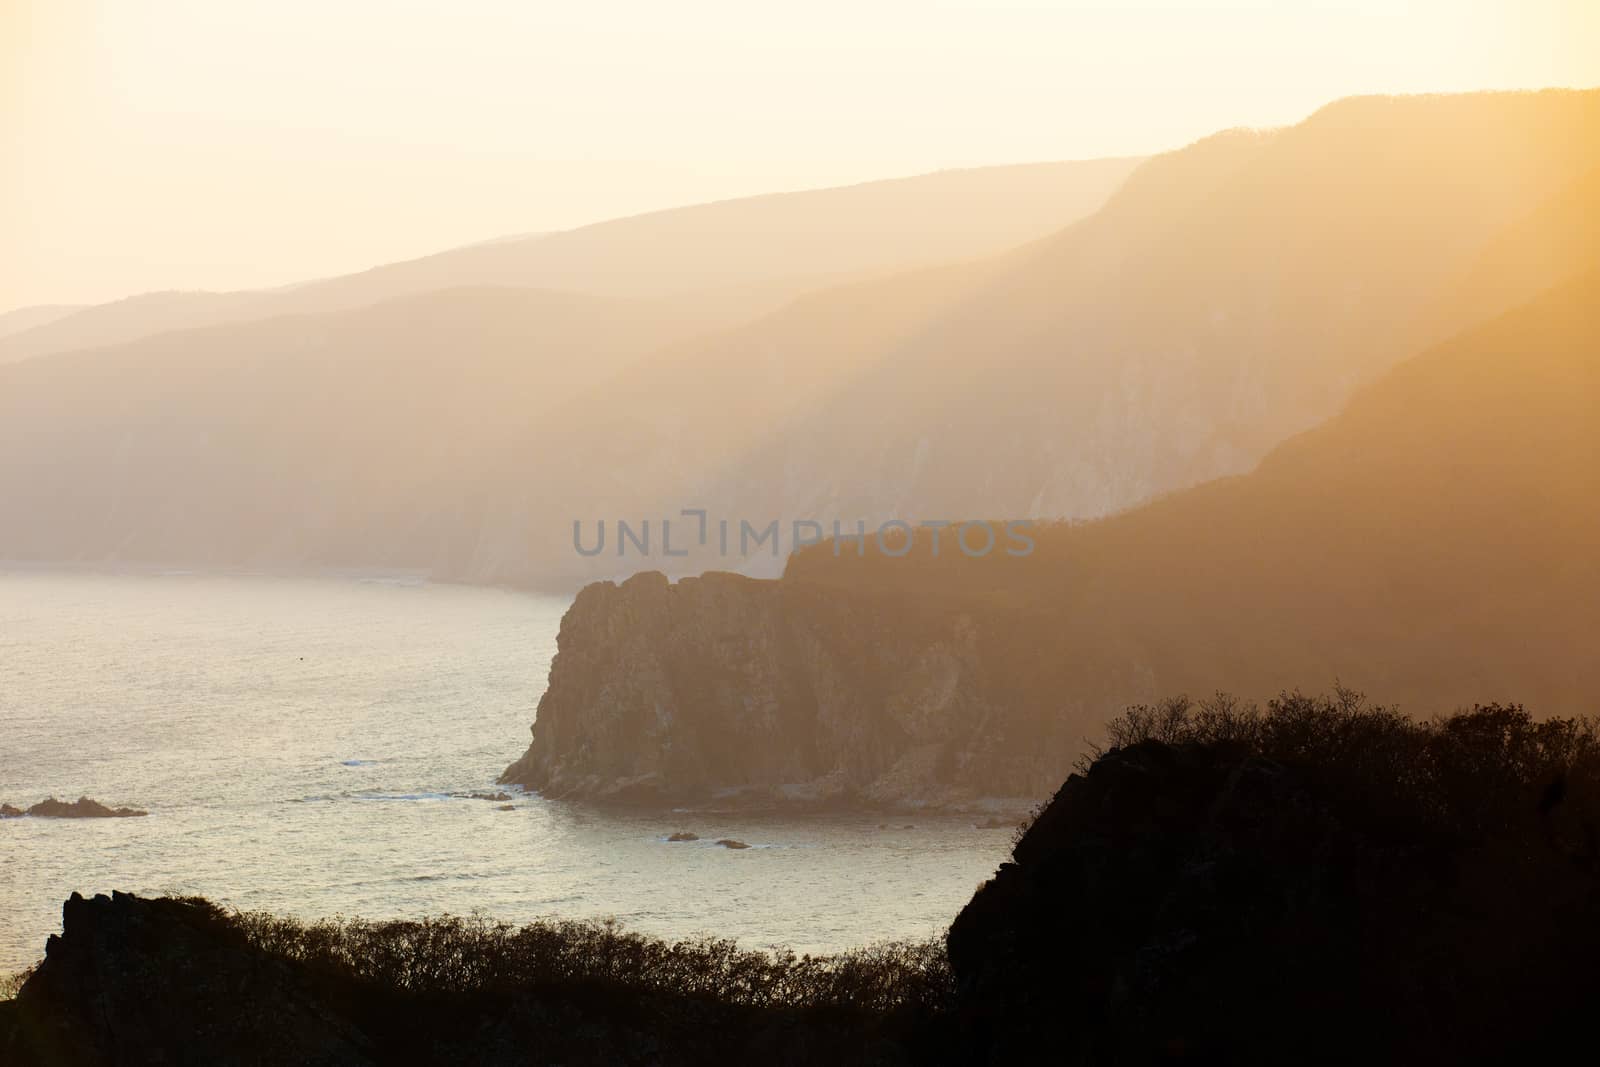 The rays of the setting sun make their way through the rocky coast of the reserve